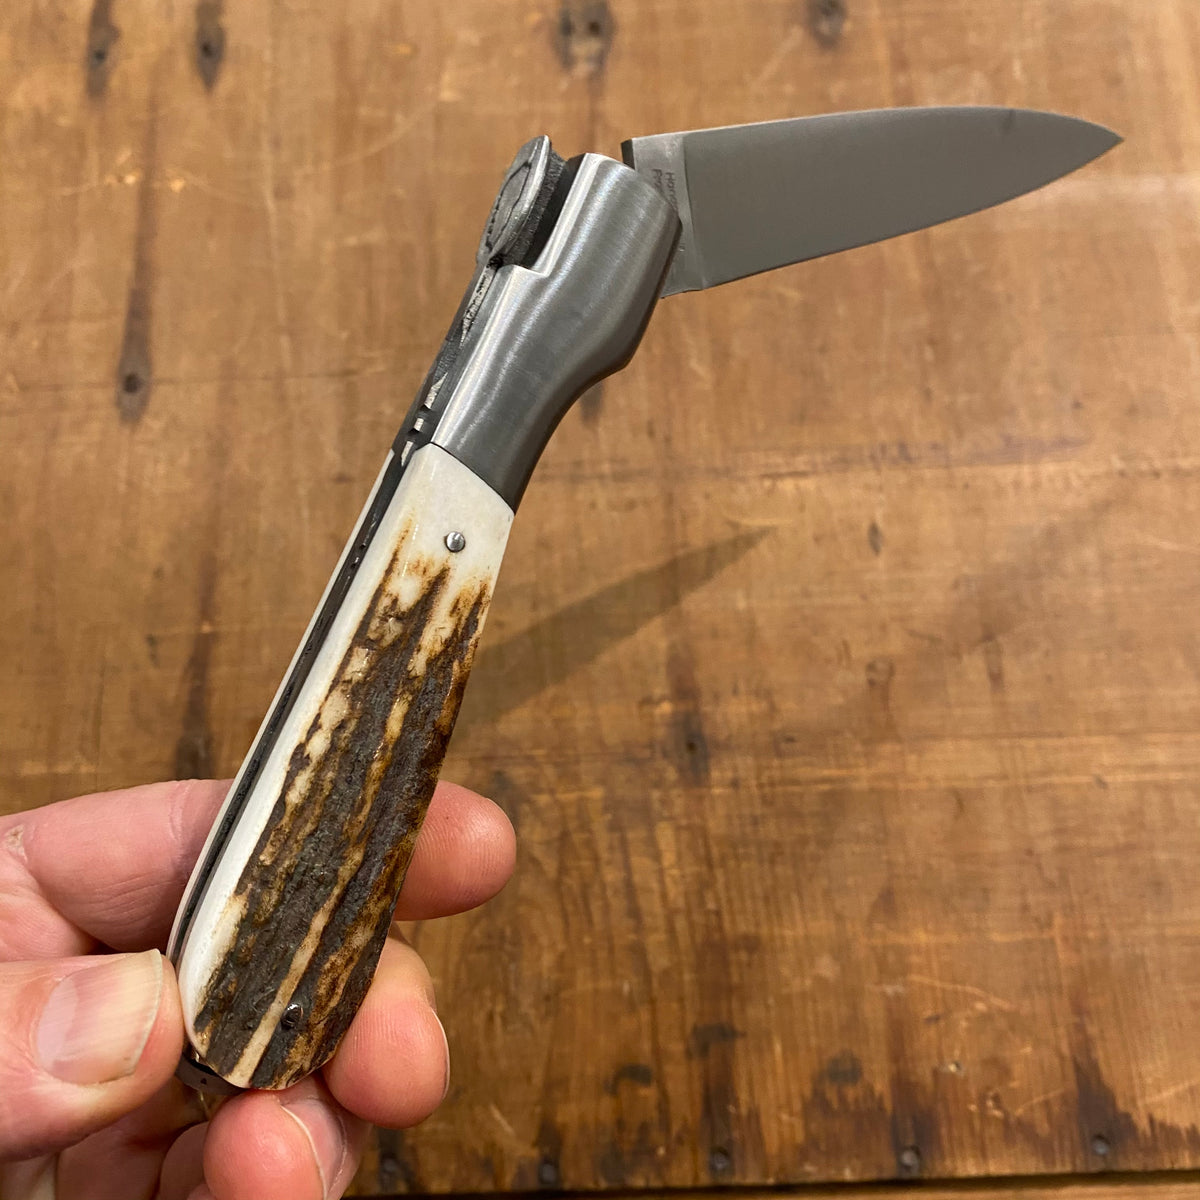 Fontenille Pataud Sperone 12cm Drop Point Stainless Lockback Stag Handle